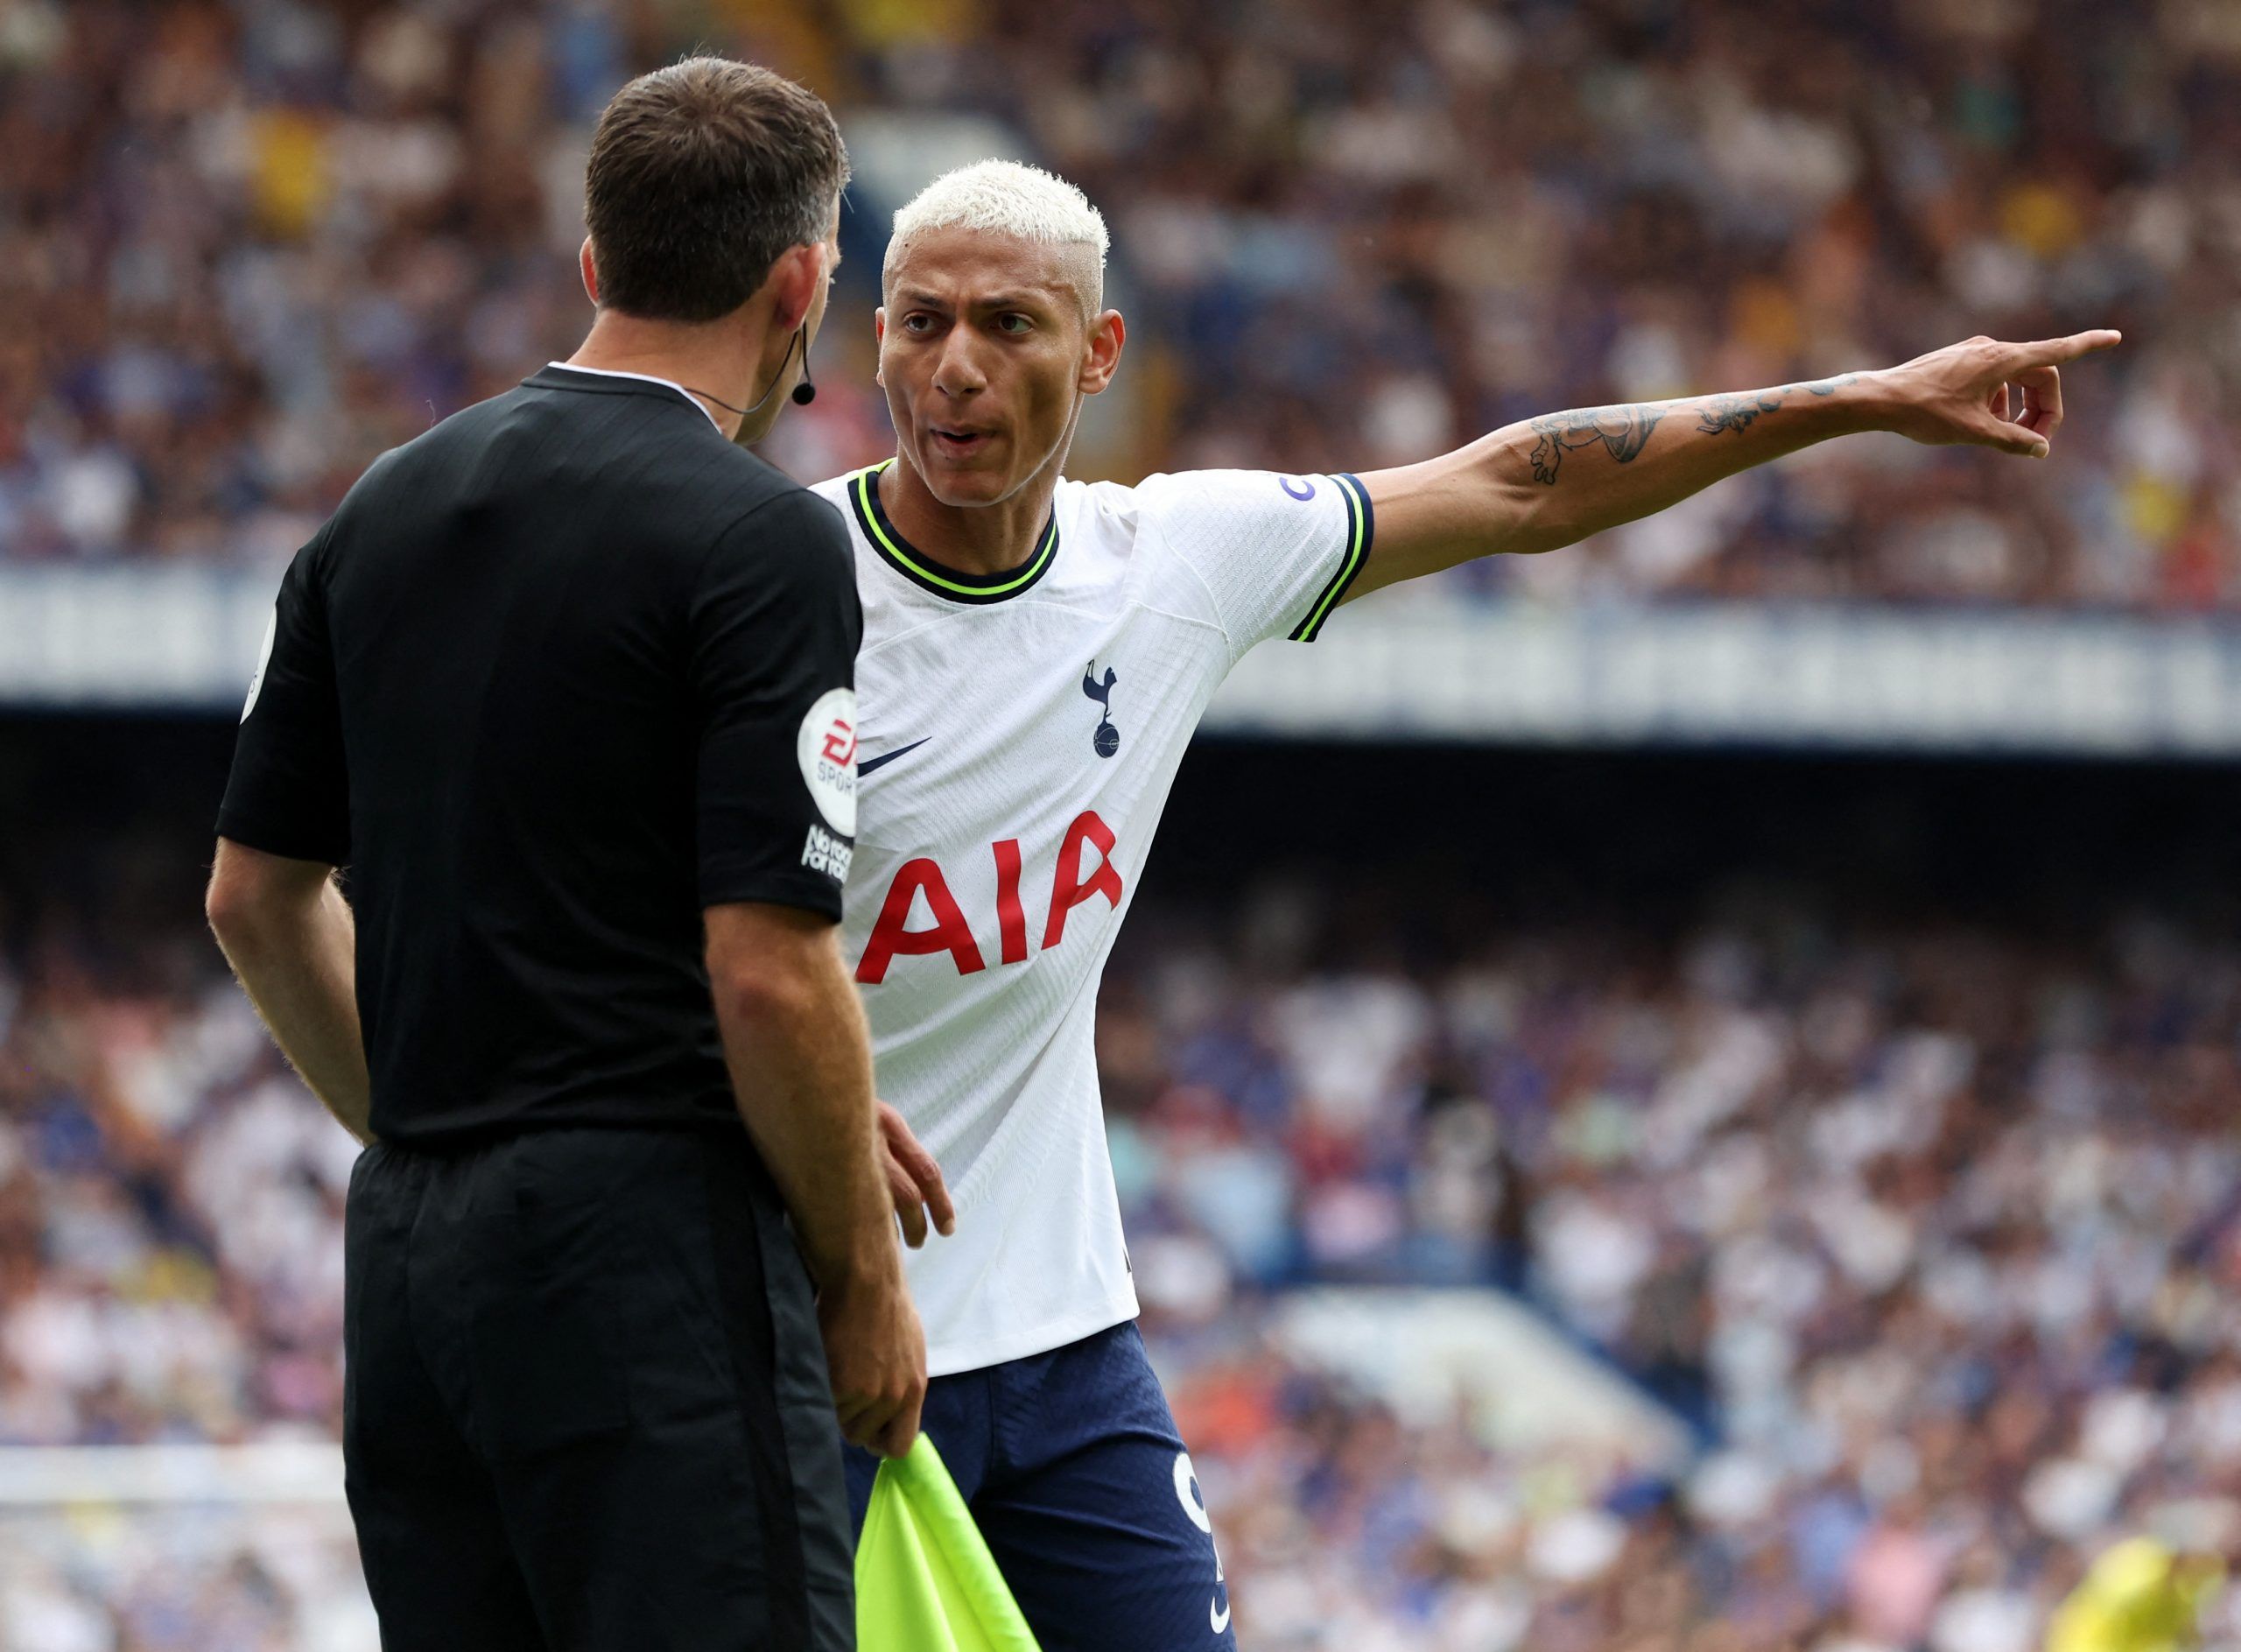 Soccer Football - Premier League - Chelsea v Tottenham Hotspur - Stamford Bridge, London, Britain - August 14, 2022 Tottenham Hotspur's Richarlison remonstrates with the referees assistant Action Images via Reuters/Paul Childs EDITORIAL USE ONLY. No use with unauthorized audio, video, data, fixture lists, club/league logos or 'live' services. Online in-match use limited to 75 images, no video emulation. No use in betting, games or single club /league/player publications.  Please contact your acc